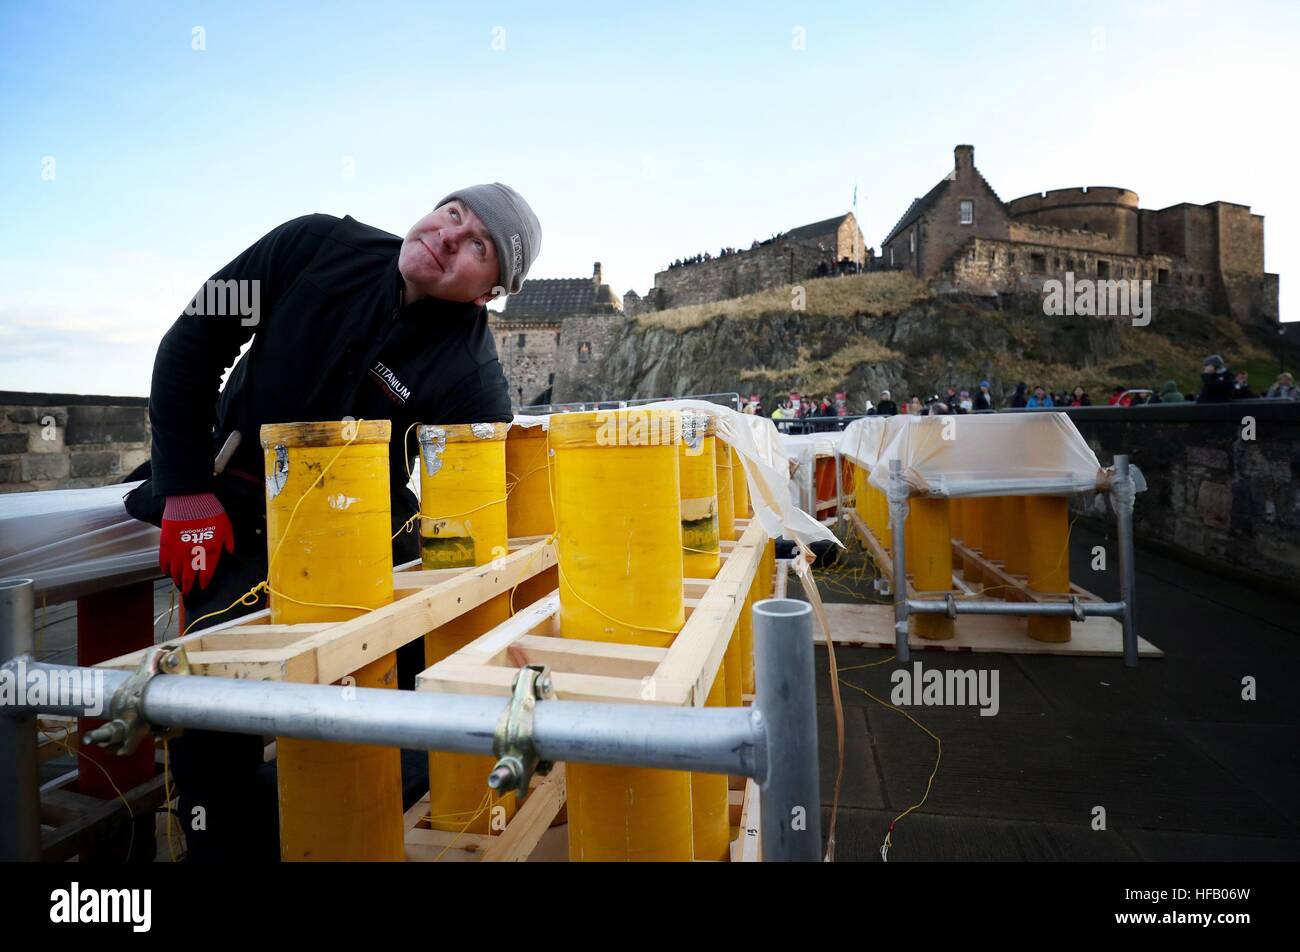 Pyro-technician Shaun Gibson from Titanium Fireworks sets up some of the 2.6 tonnes of fireworks along the ramparts of Edinburgh Castle ahead of the Hogmanay fireworks display for the New Year. Stock Photo